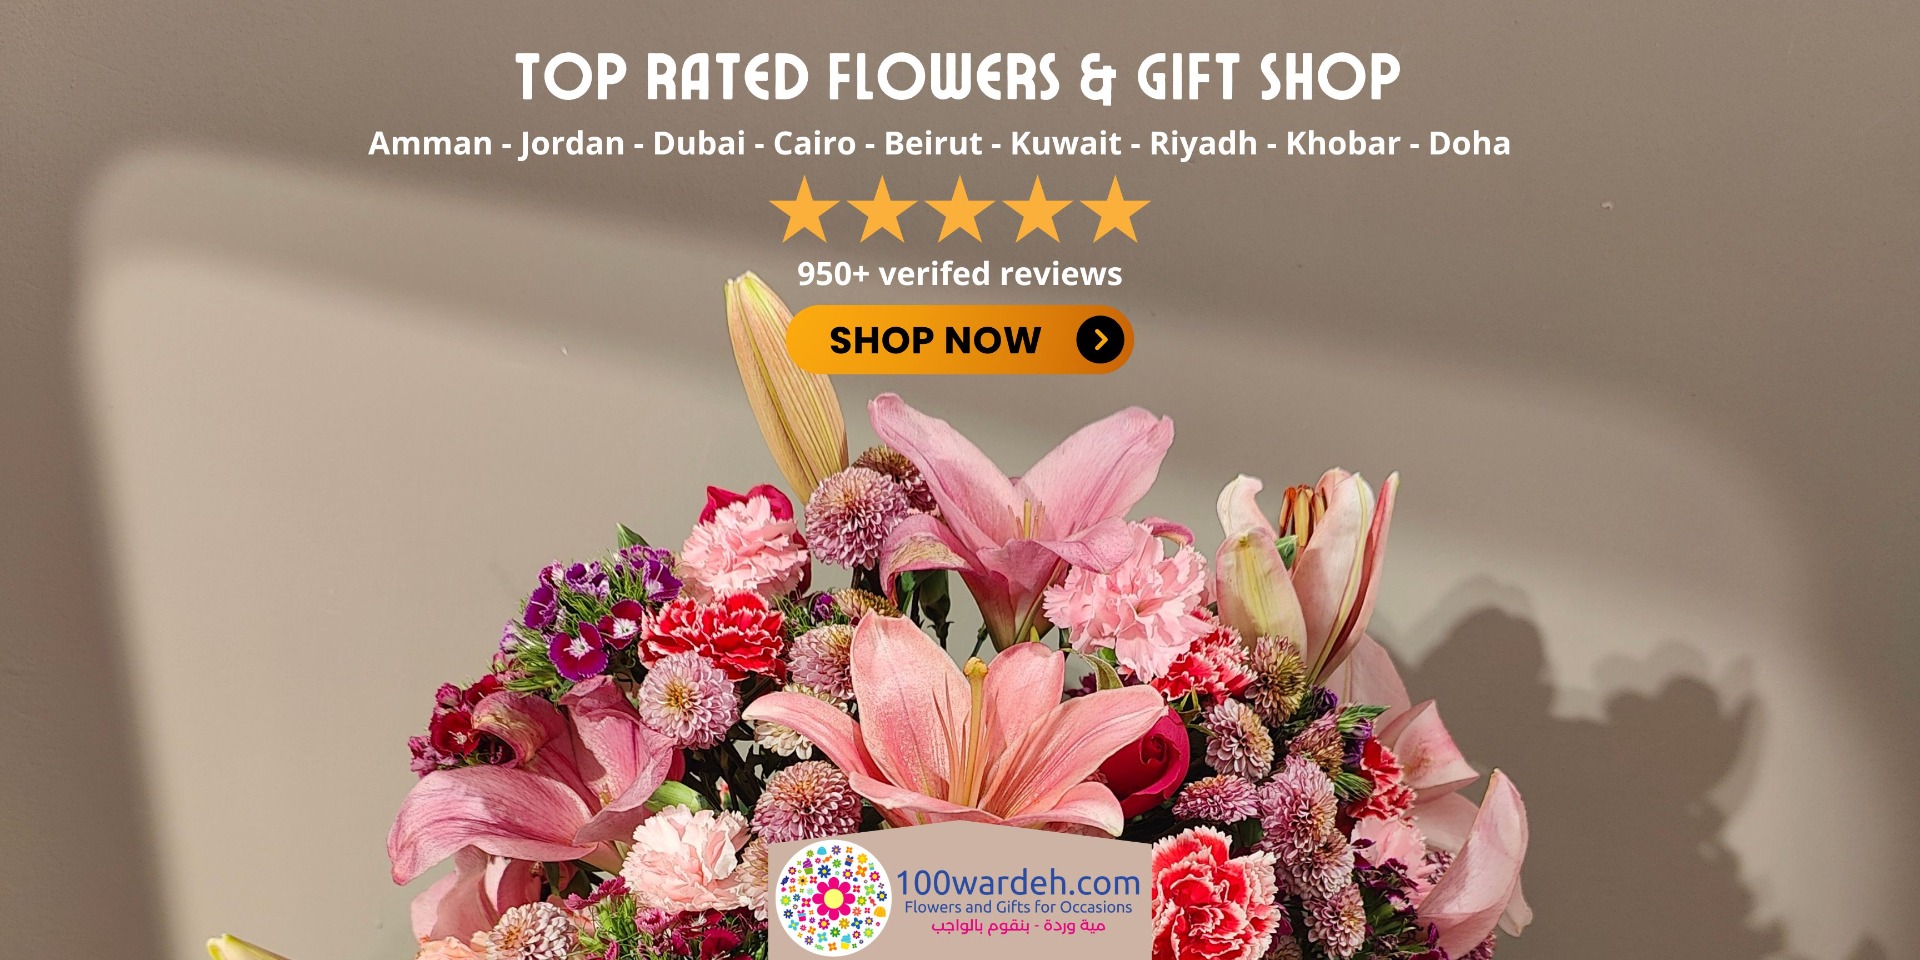 Send Flowers and gifts delivery Amman Jordan